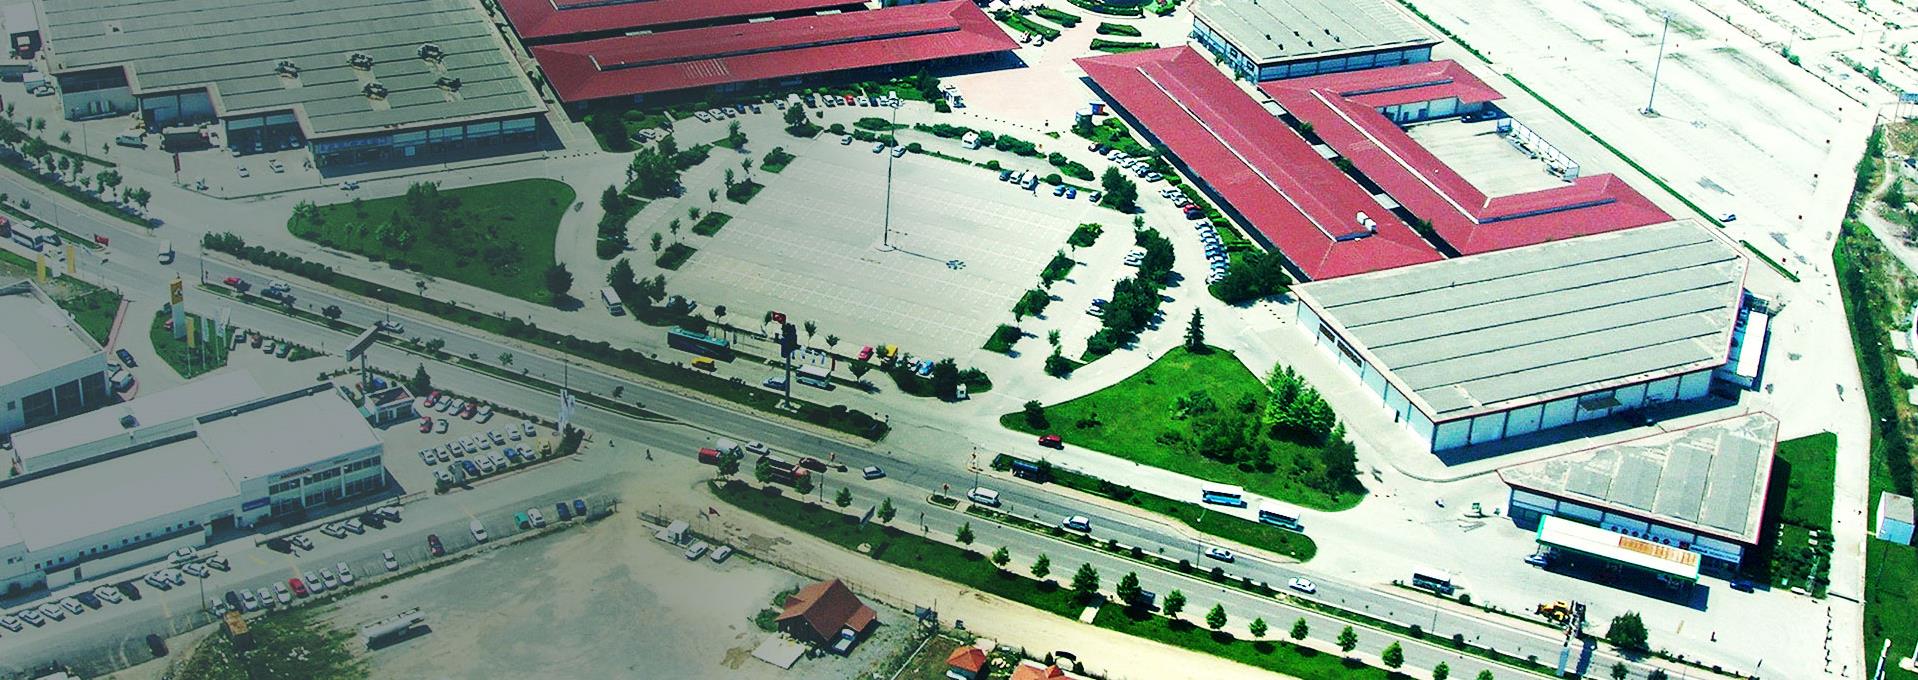 first outlet center of Turkey